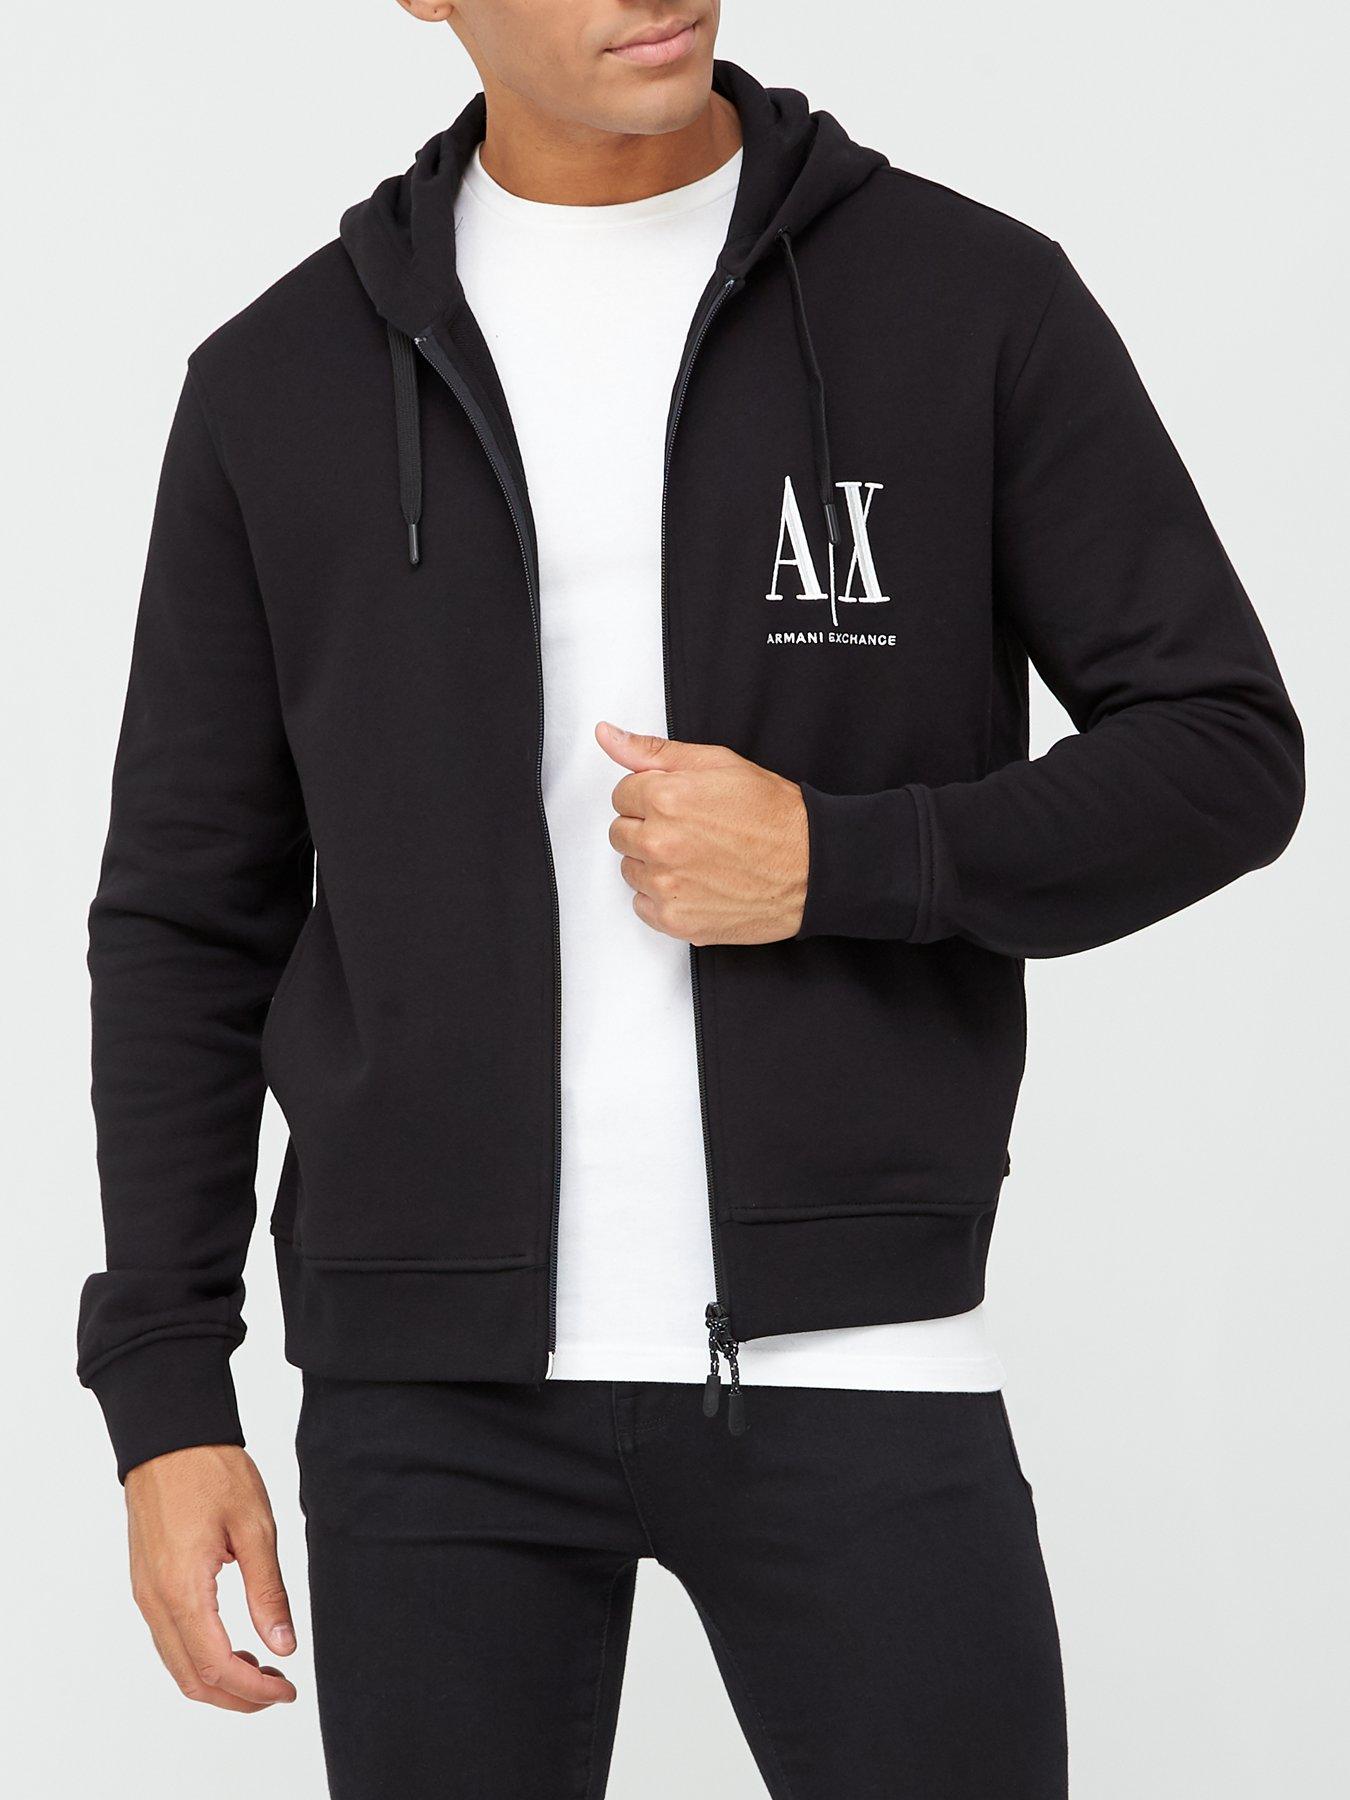 Armani Exchange Red Hoodie Cheap Clearance, Save 61% 